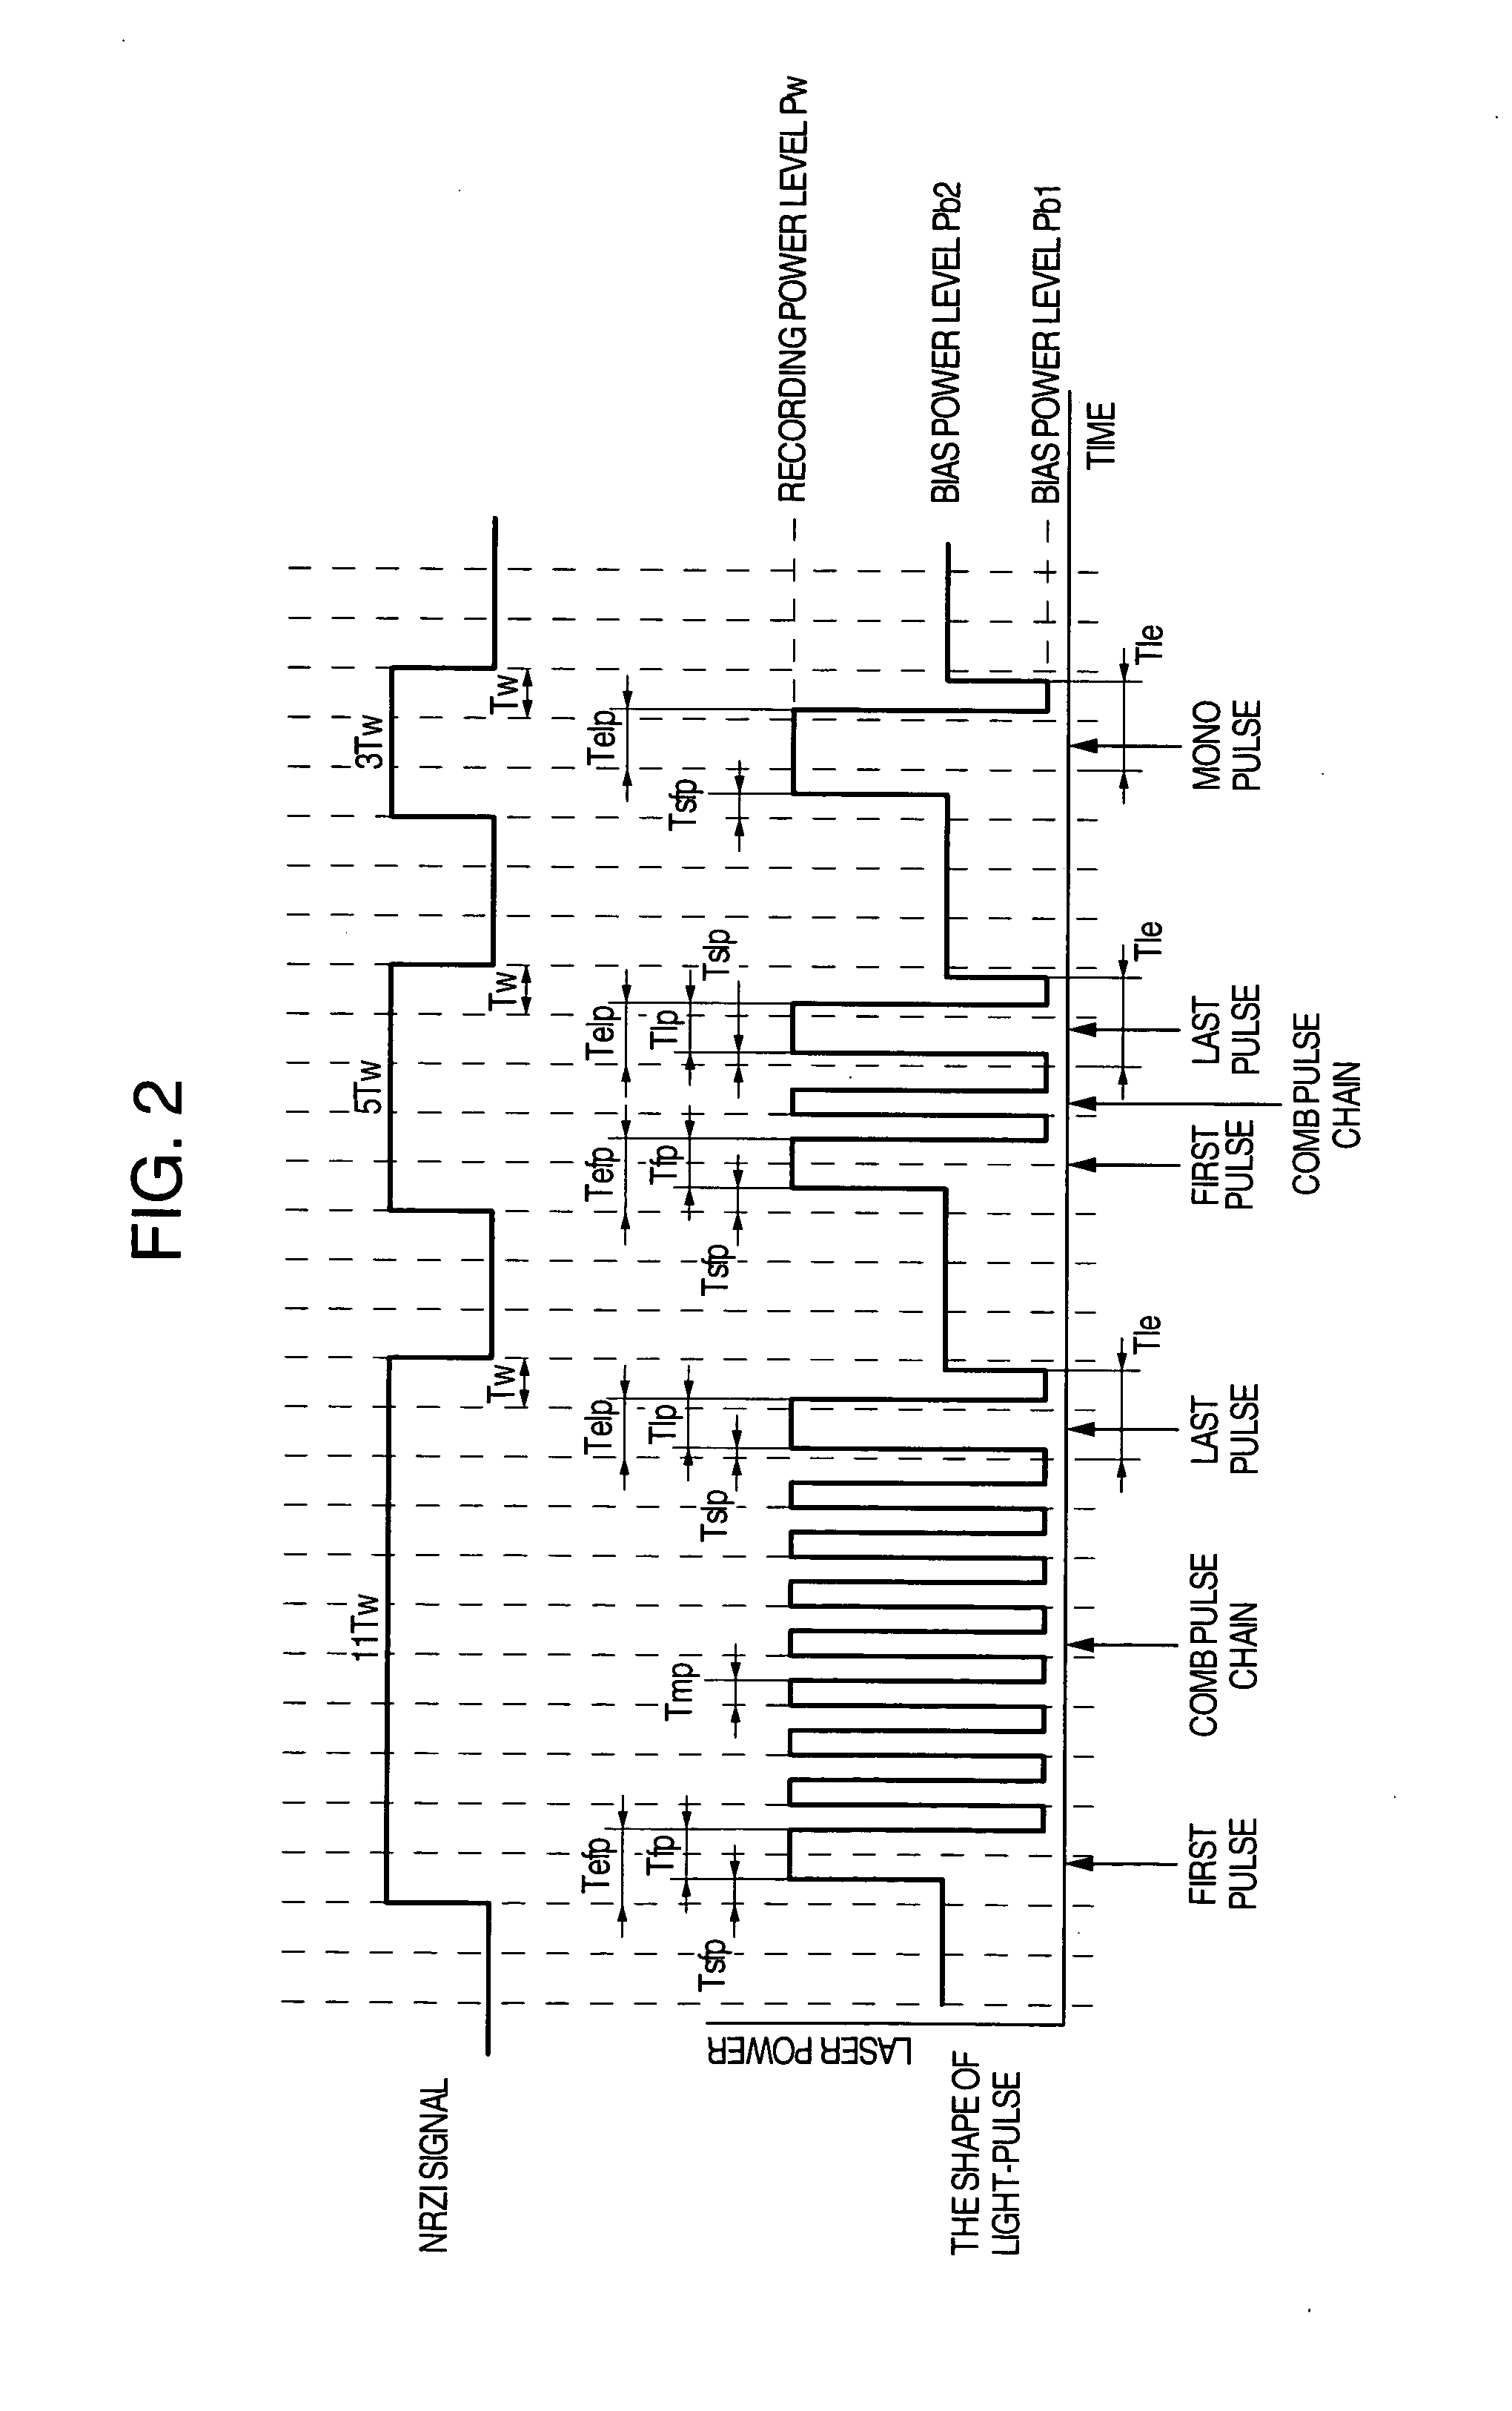 Optical disk recording method, optical disk device and optical disk